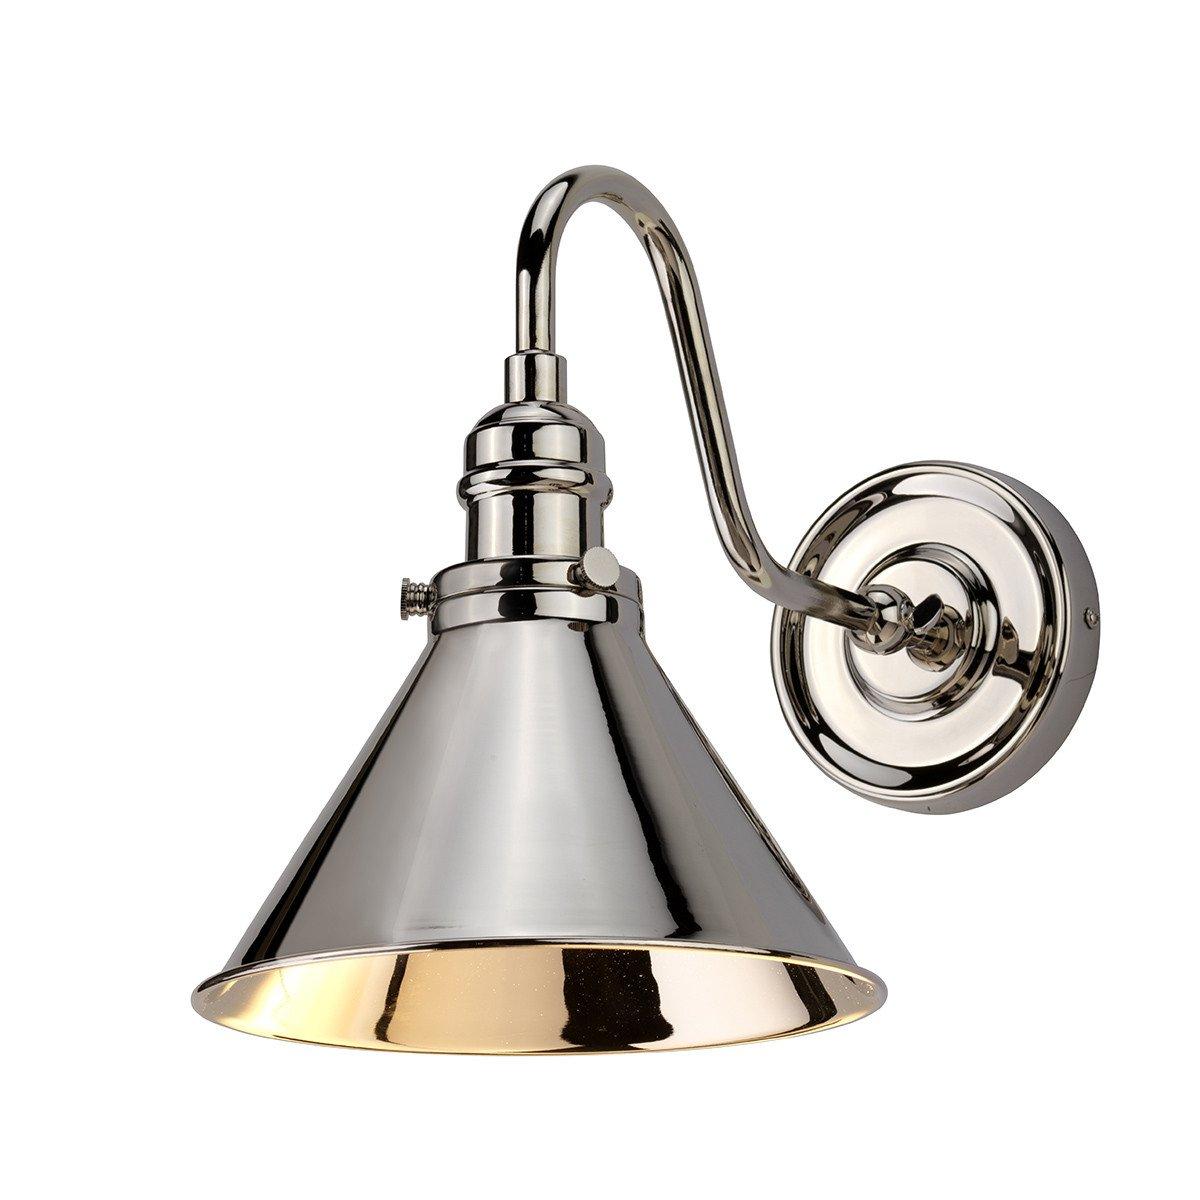 Provence 1 Light Indoor Dome Wall Light Polished Nickel E27